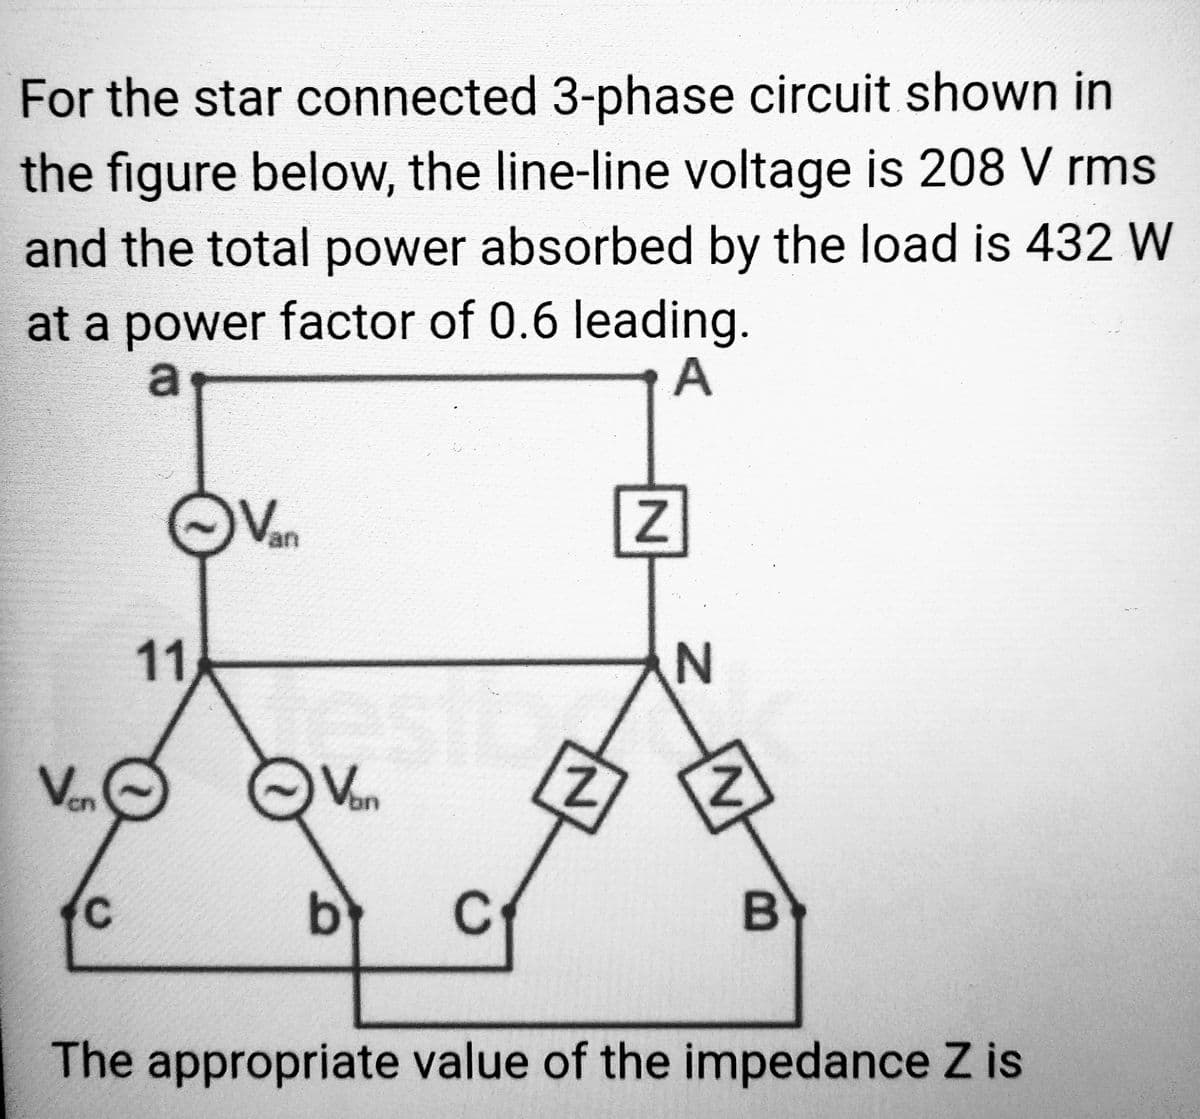 For the star connected 3-phase circuit shown in
the figure below, the line-line voltage is 208 V rms
and the total power absorbed by the load is 432 W
at a power factor of 0.6 leading.
a
A
Ven
11
Van
Van
b C
Z
N
산
B
The appropriate value of the impedance Z is